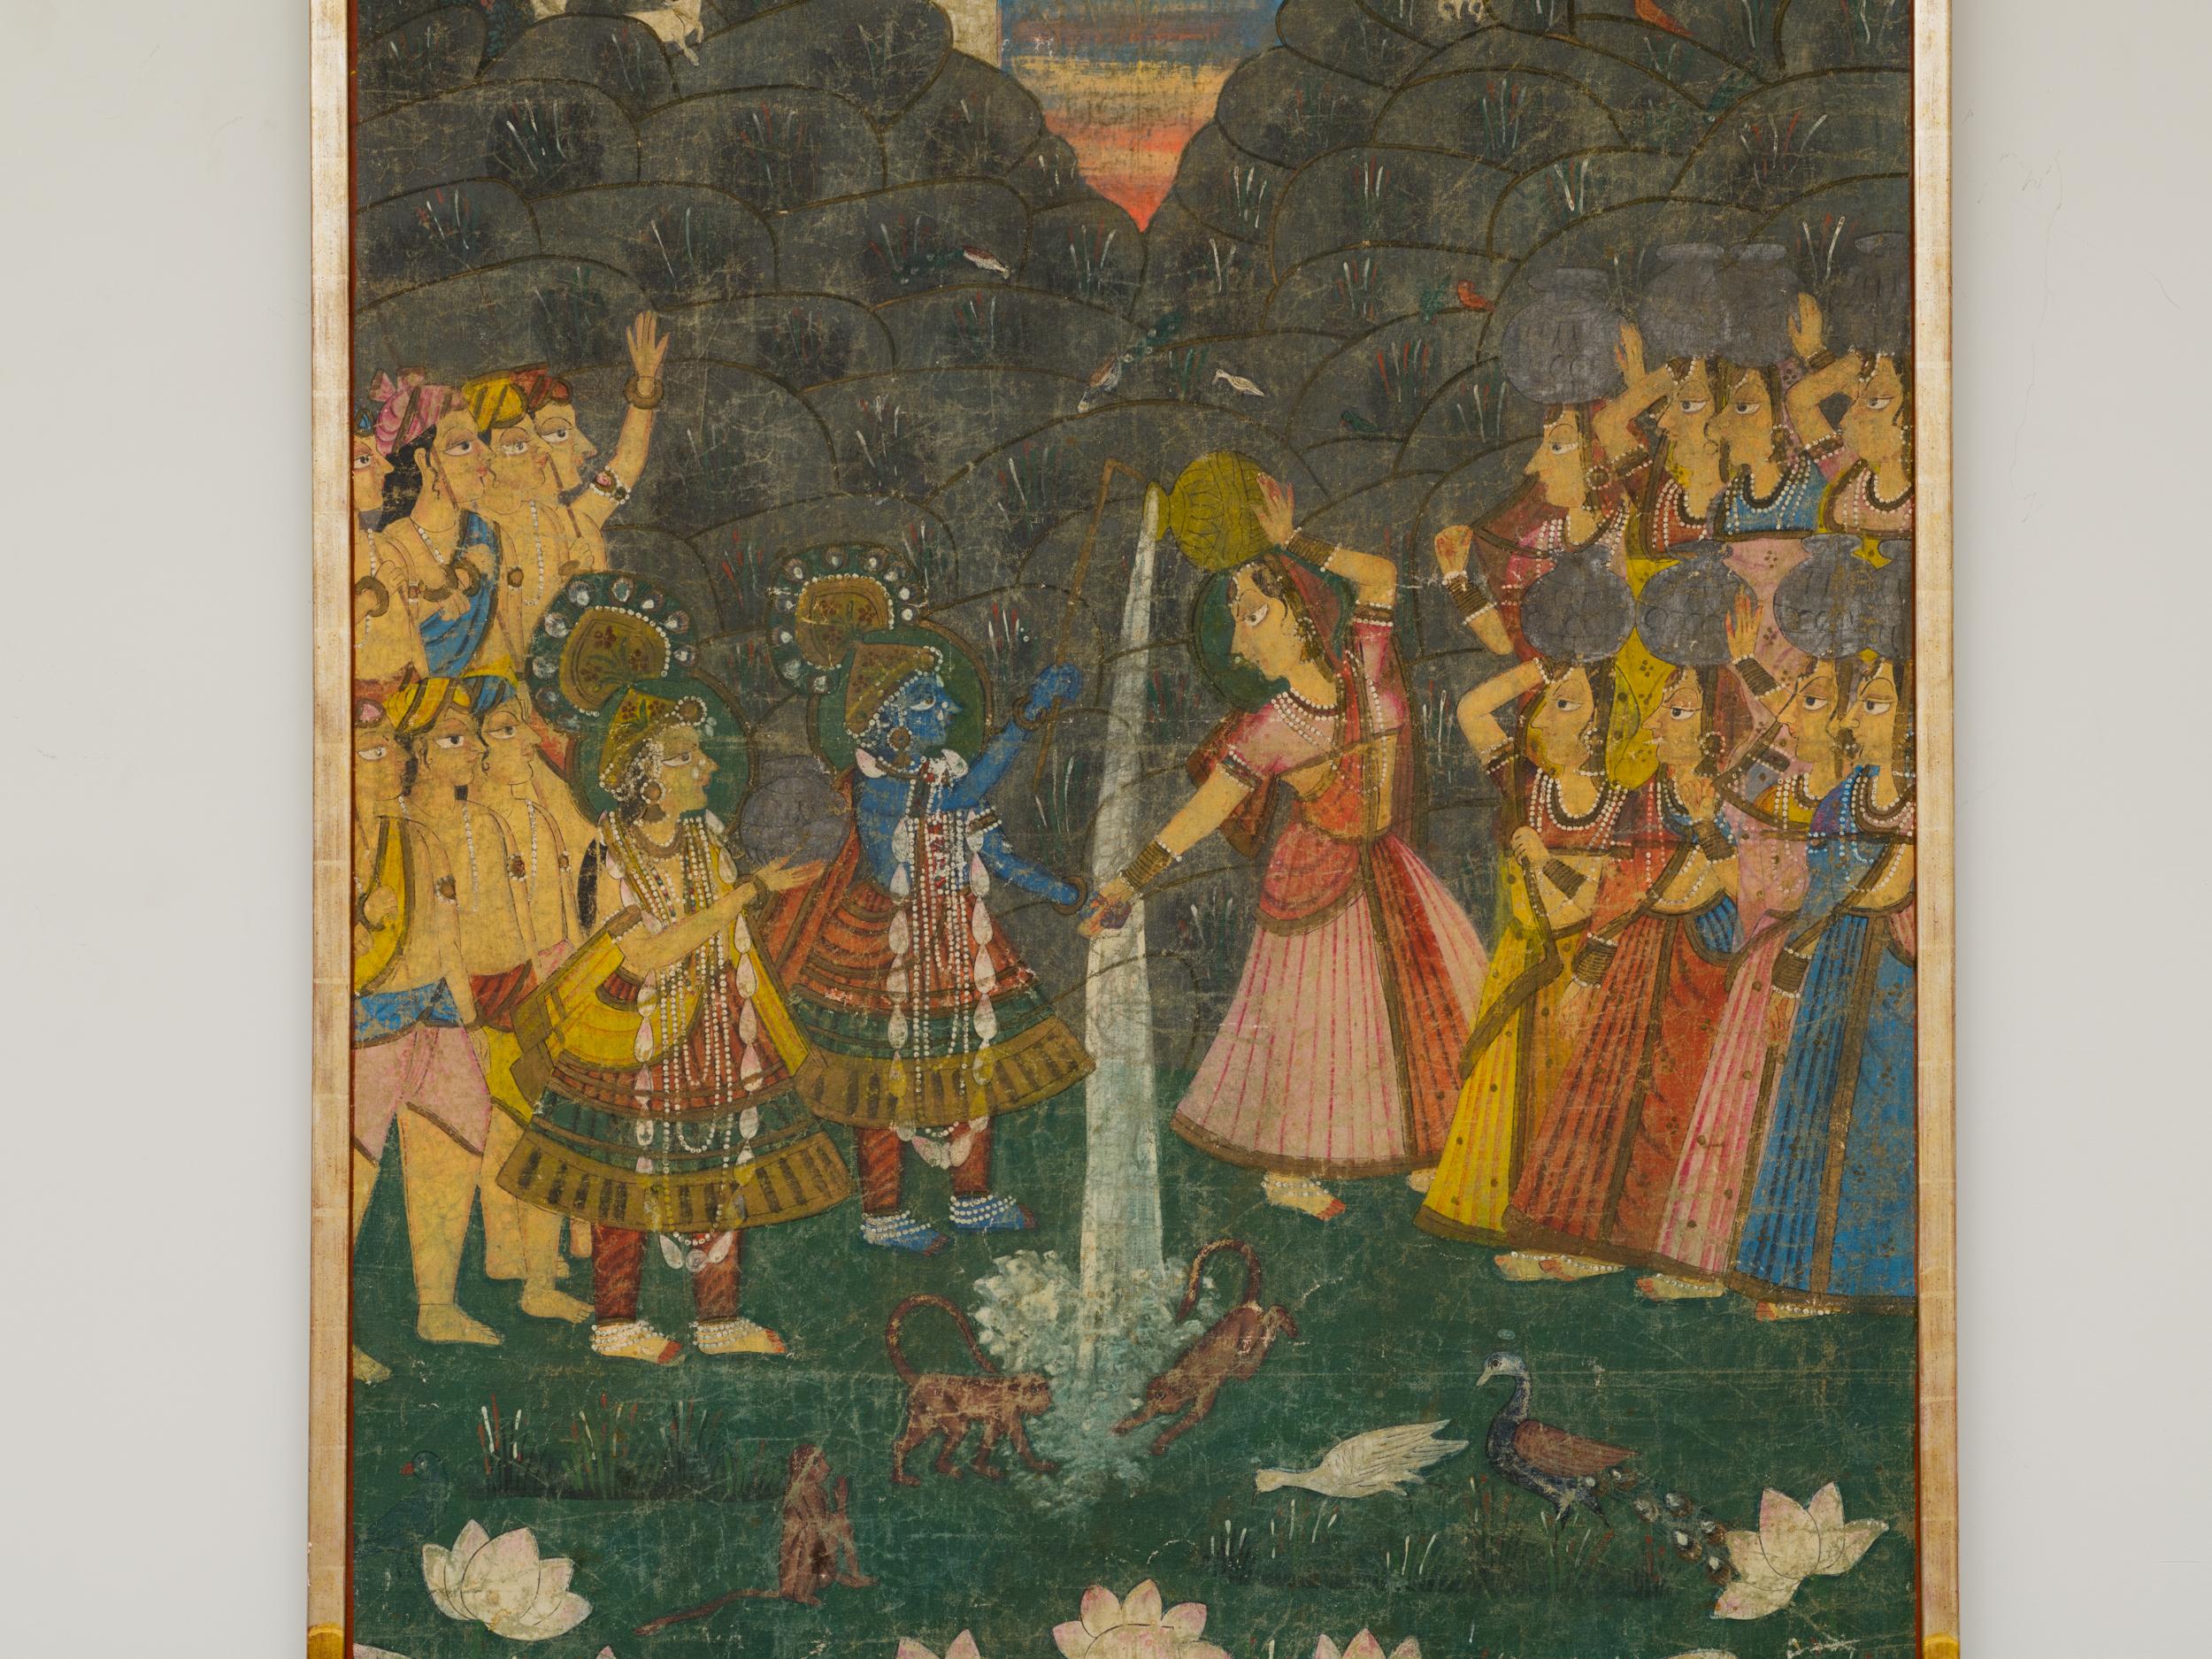 Beautiful 19th century Pichhwai silk painting of Krishna and Radha accompanied by gopis, devas, 
the sun God Surya, plants and animals enjoying Dana Lila together.
Exquisitely painted on silk, framed in silver and gold c. 1980's gilt wood frame,